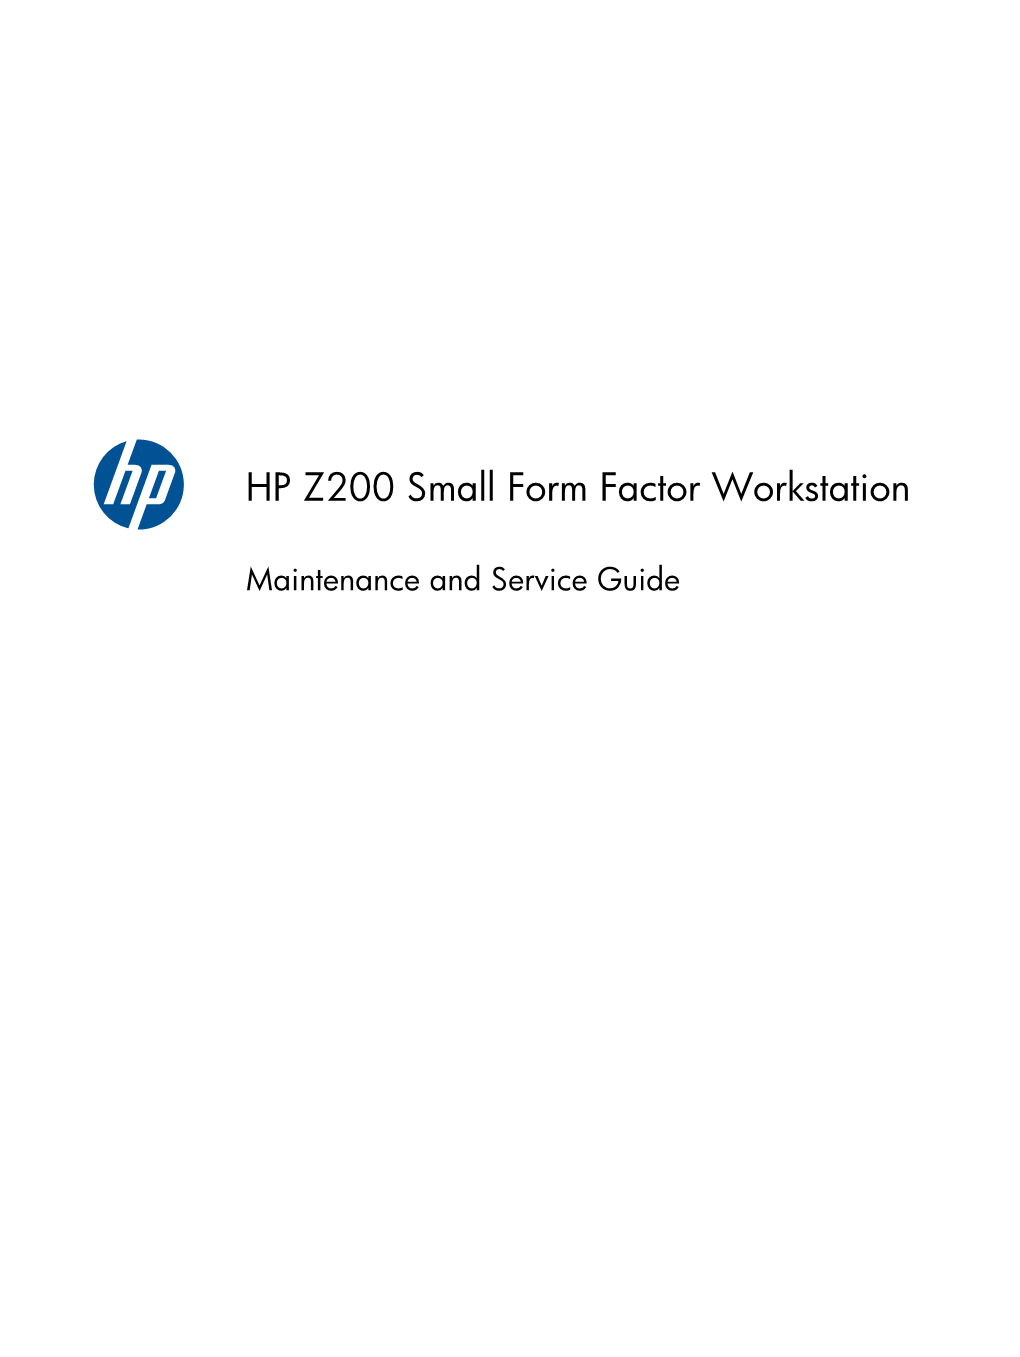 HP Z200 Small Form Factor Workstation